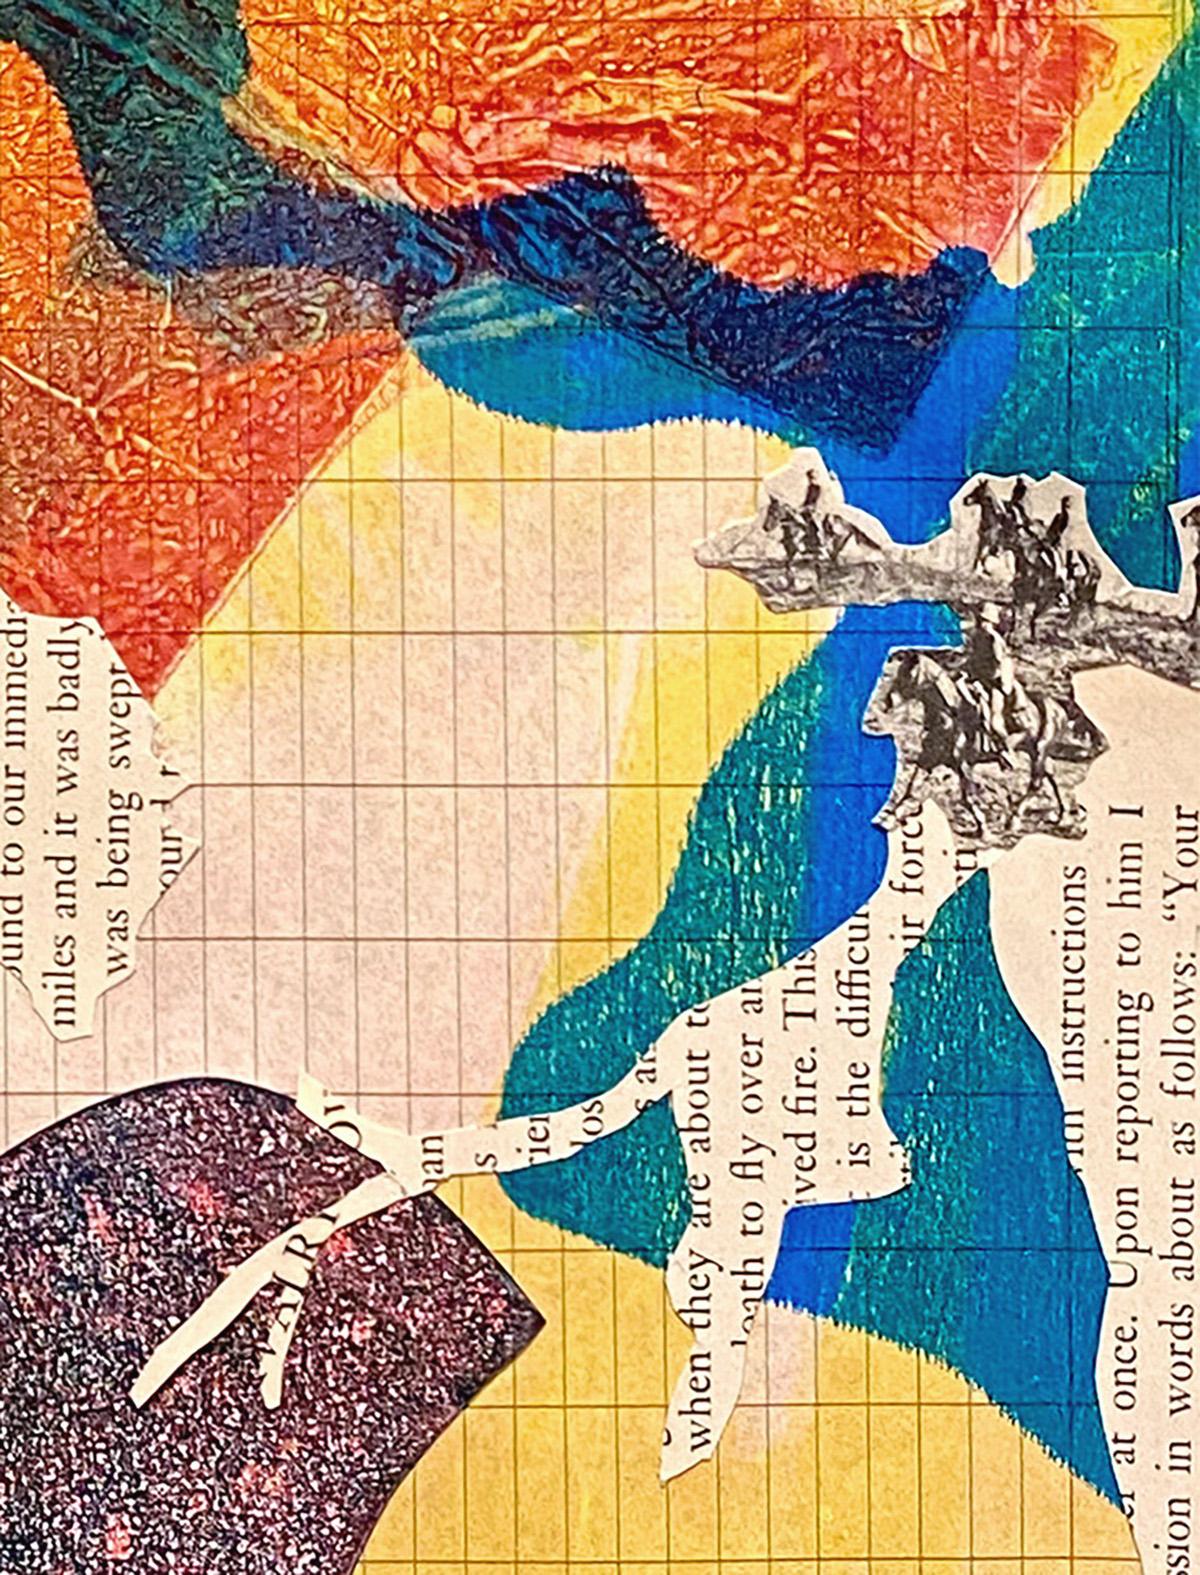 Monica DeSalvo’s “Aerial Ferry” is a 16 x 12 inch mixed media abstract collage on 1950s graph and ledger papers. Bits of text from a vintage cavalry book overlaps fragments of acrylic monotypes with textured botanical forms in bright orange, yellow,